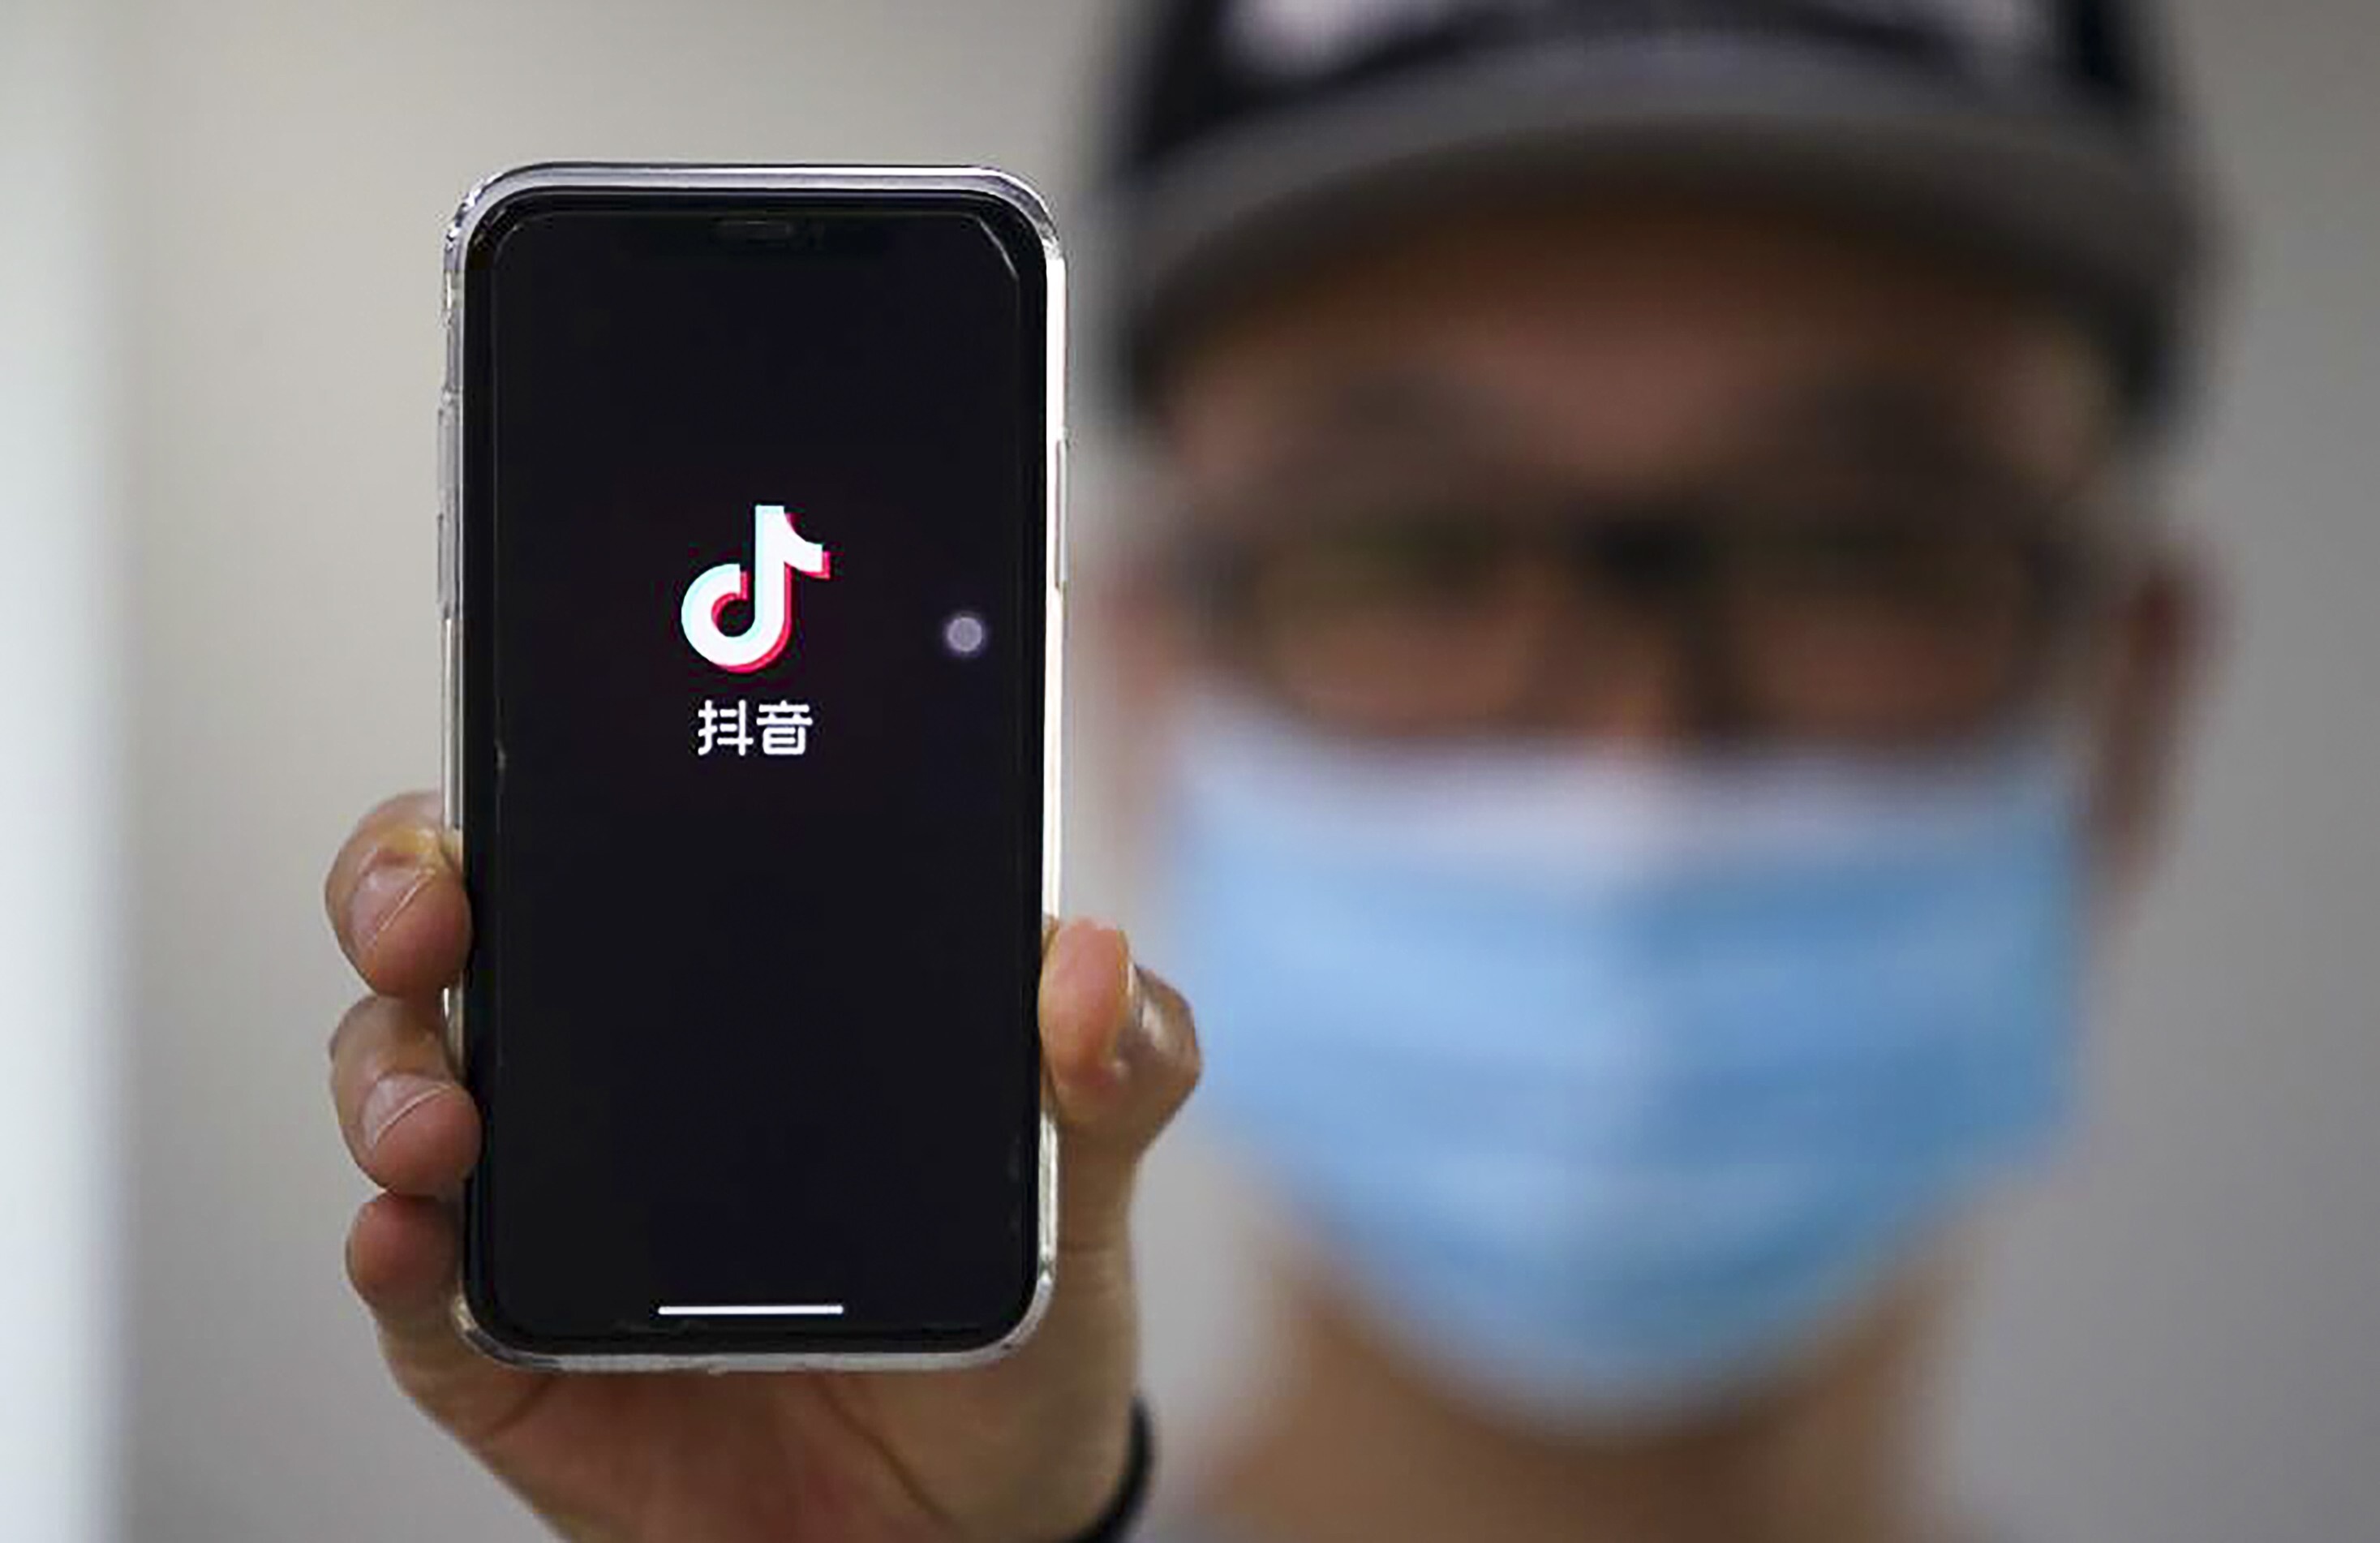 ByteDance-owned short video-sharing platform Douyin, the sister app of TikTok, is displayed on a smartphone. Photo: Weibo